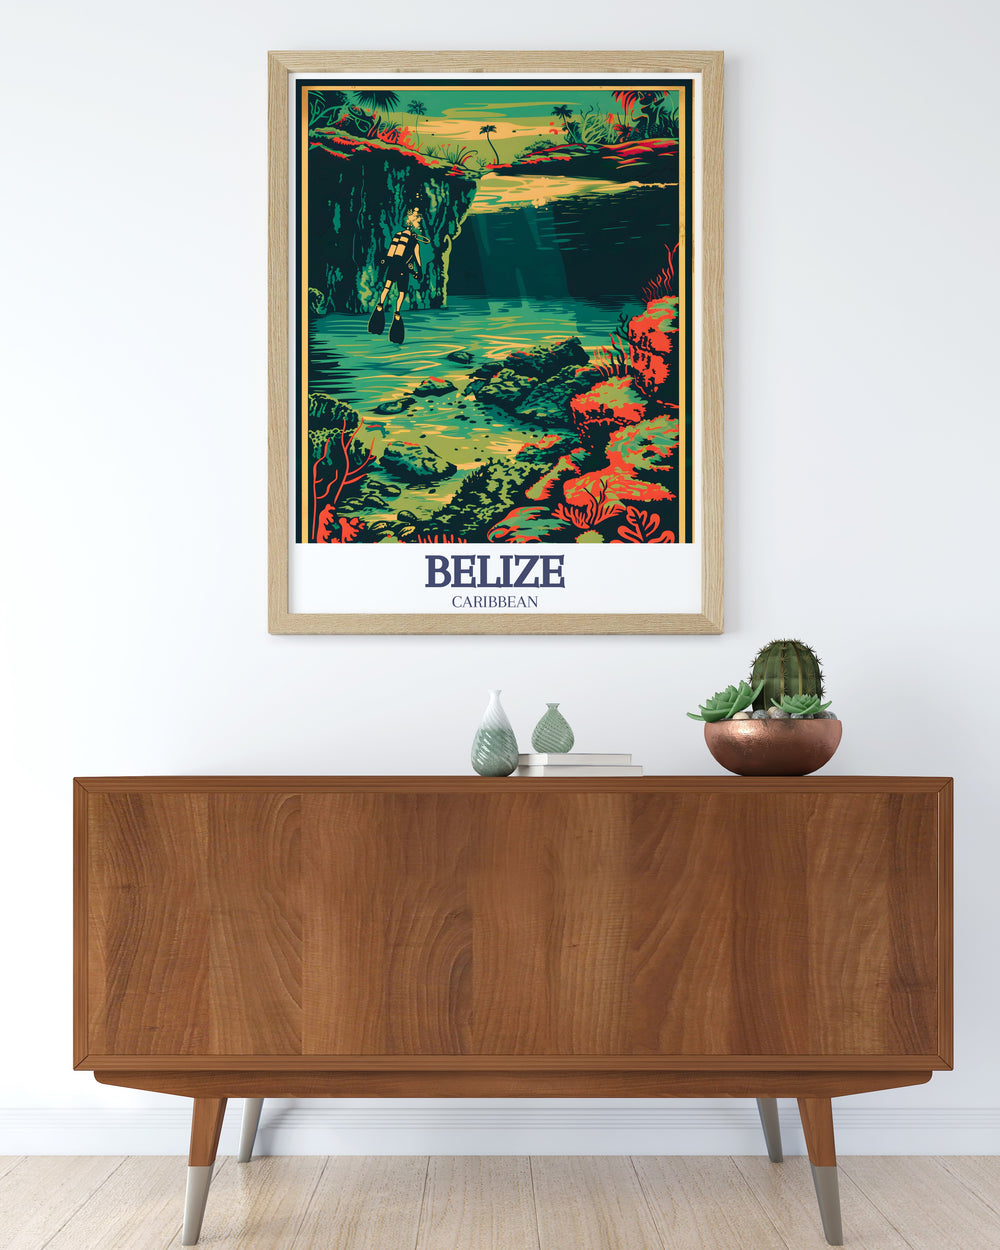 Stunning Blue Hole Belize Barrier Reef wall art capturing the serene beauty of Caribbean marine life vibrant colors and intricate details ideal for transforming any room with a touch of tropical paradise